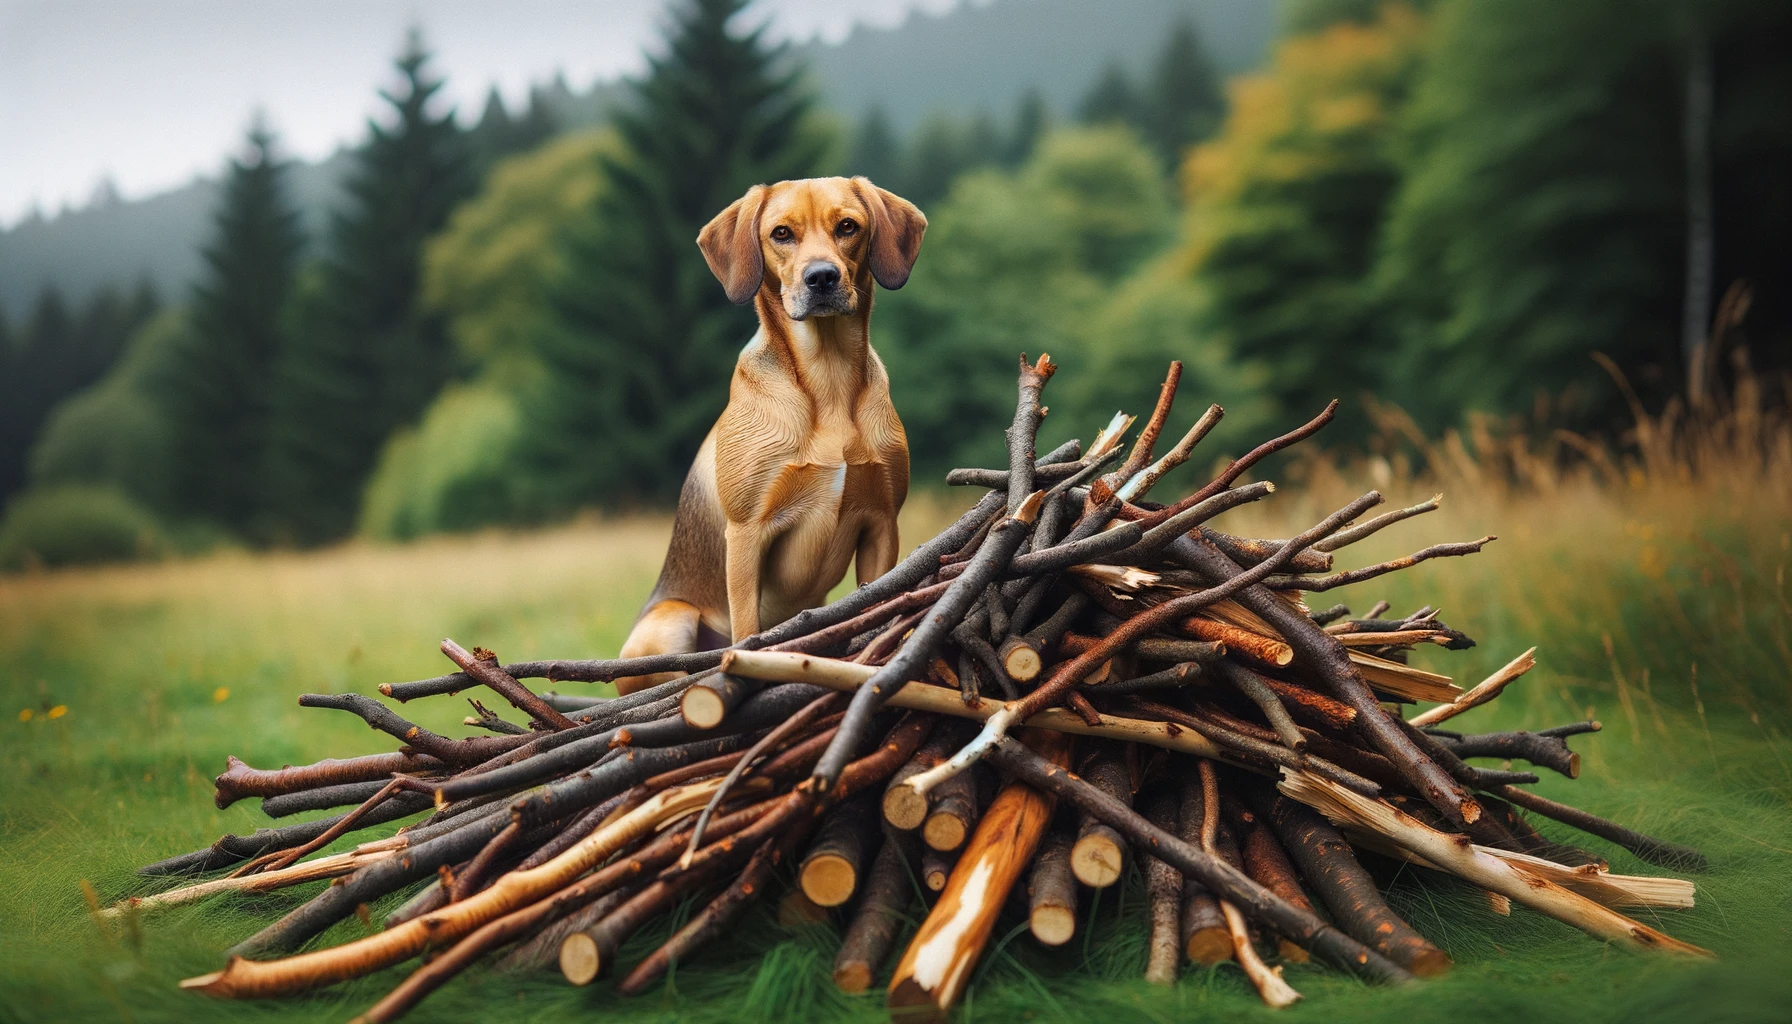 A Lab Hound Mix Standing Triumphantly Next to a Pile of Sticks It Has Fetched, Showcasing Its Retriever Skills